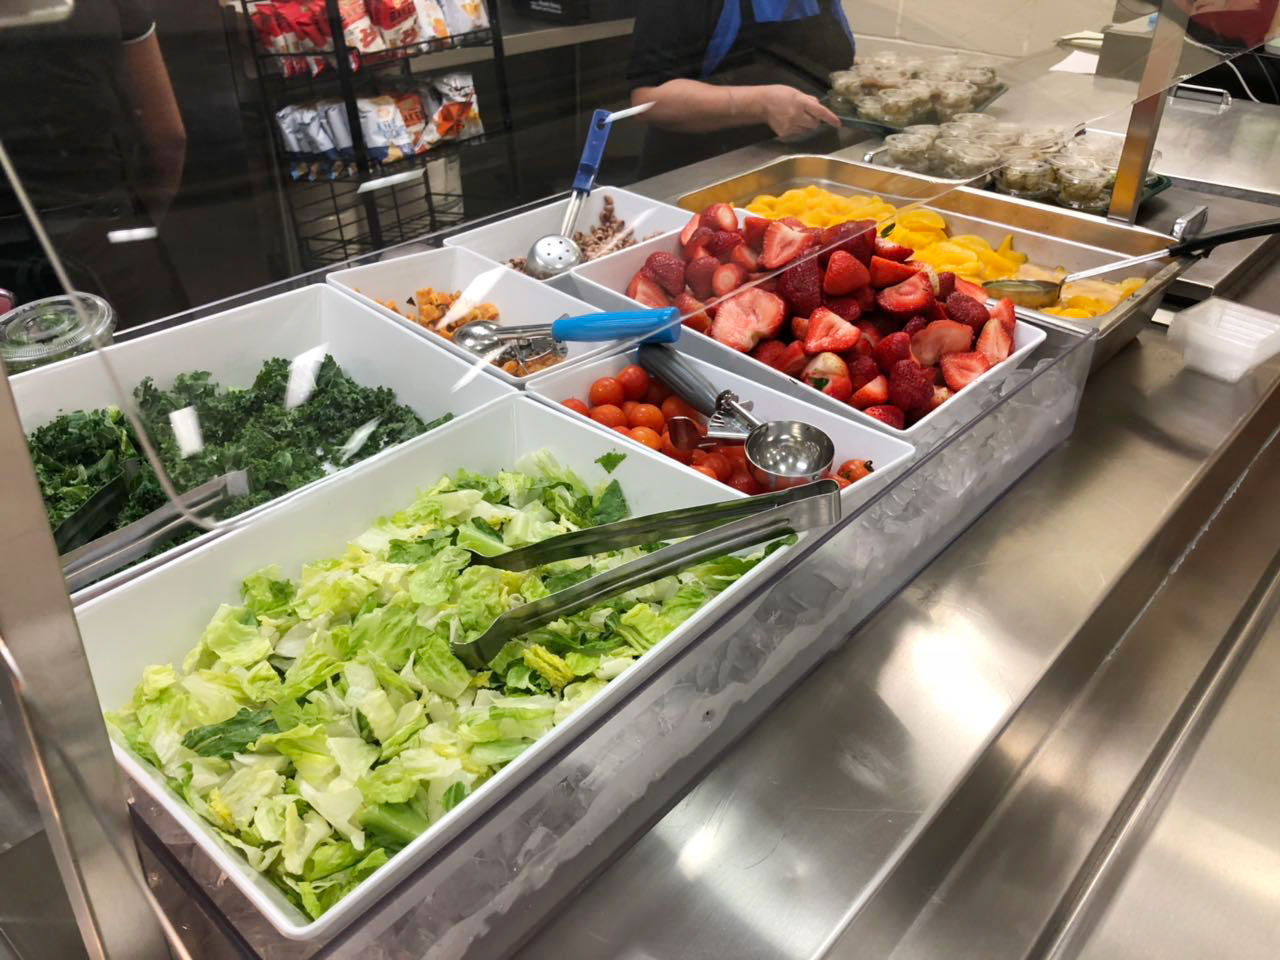 Salad bar with strawberries, peaches, lettuce, and kale